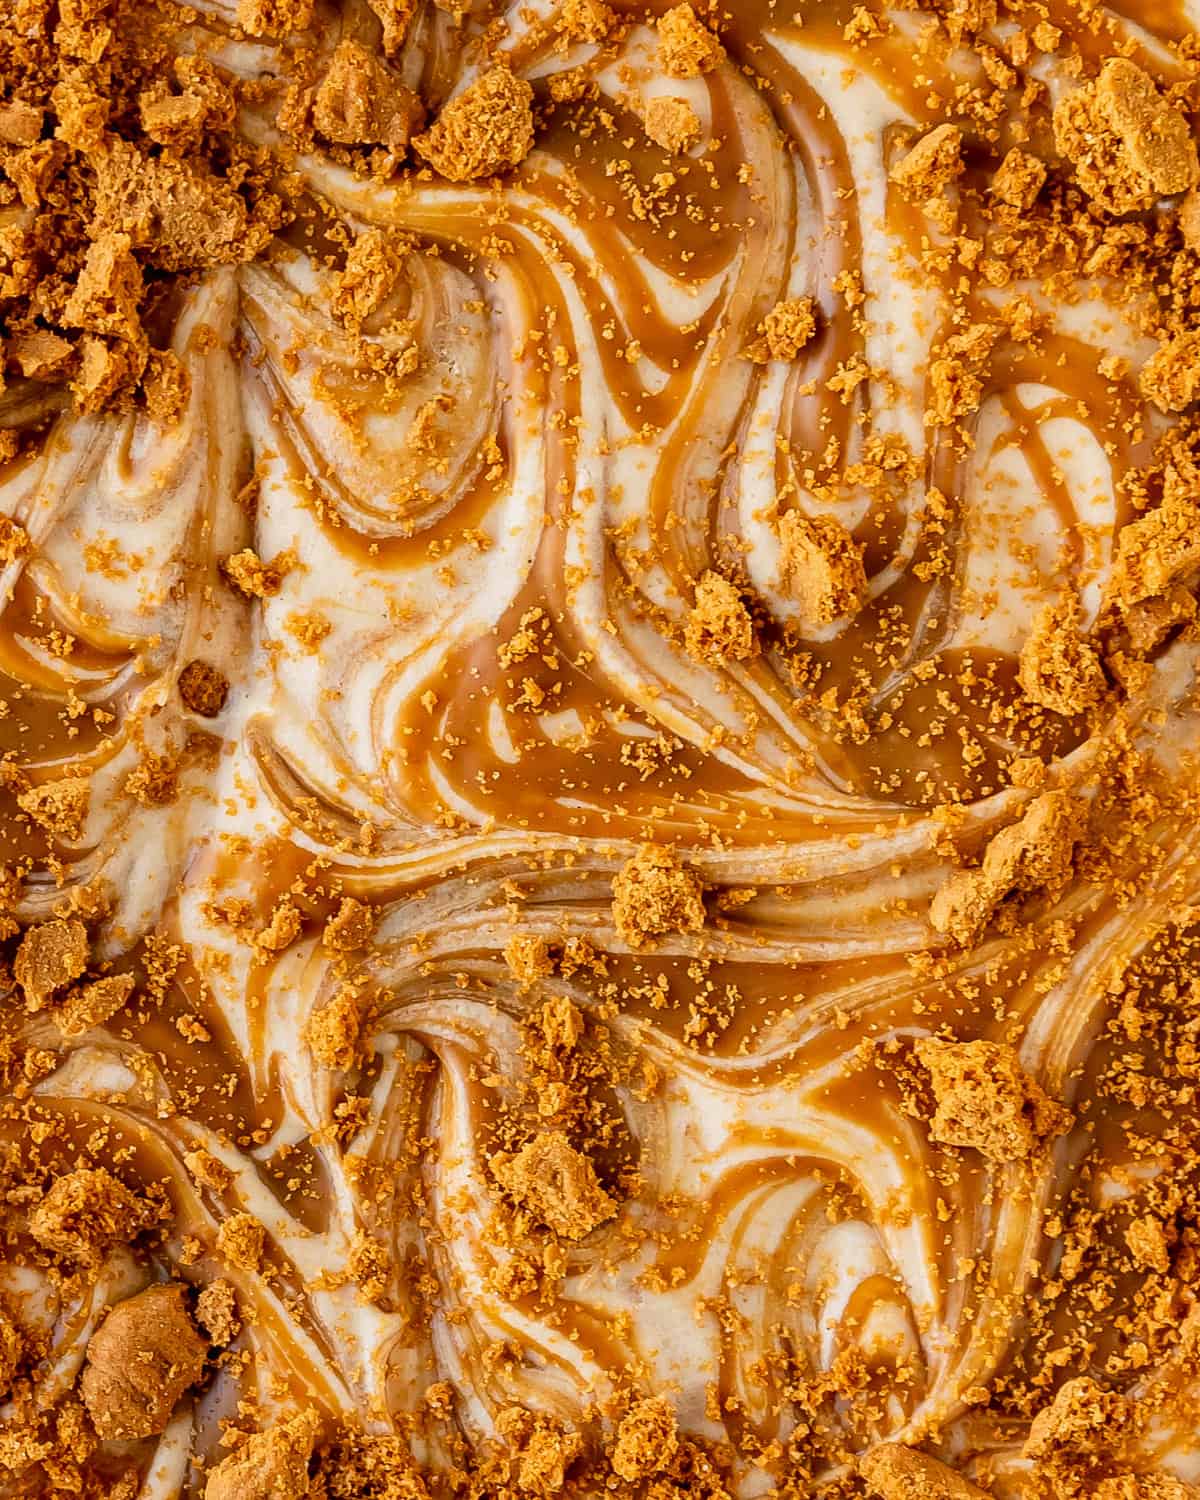 Biscoff ice cream is a creamy, cookie butter ice cream filled with swirls of cookie butter and crushed Lotus Biscoff cookies. Learn how to make Lotus ice cream in a few easy steps with just a few simple ingredients. It’s an easy no churn ice cream recipe everyone will love!